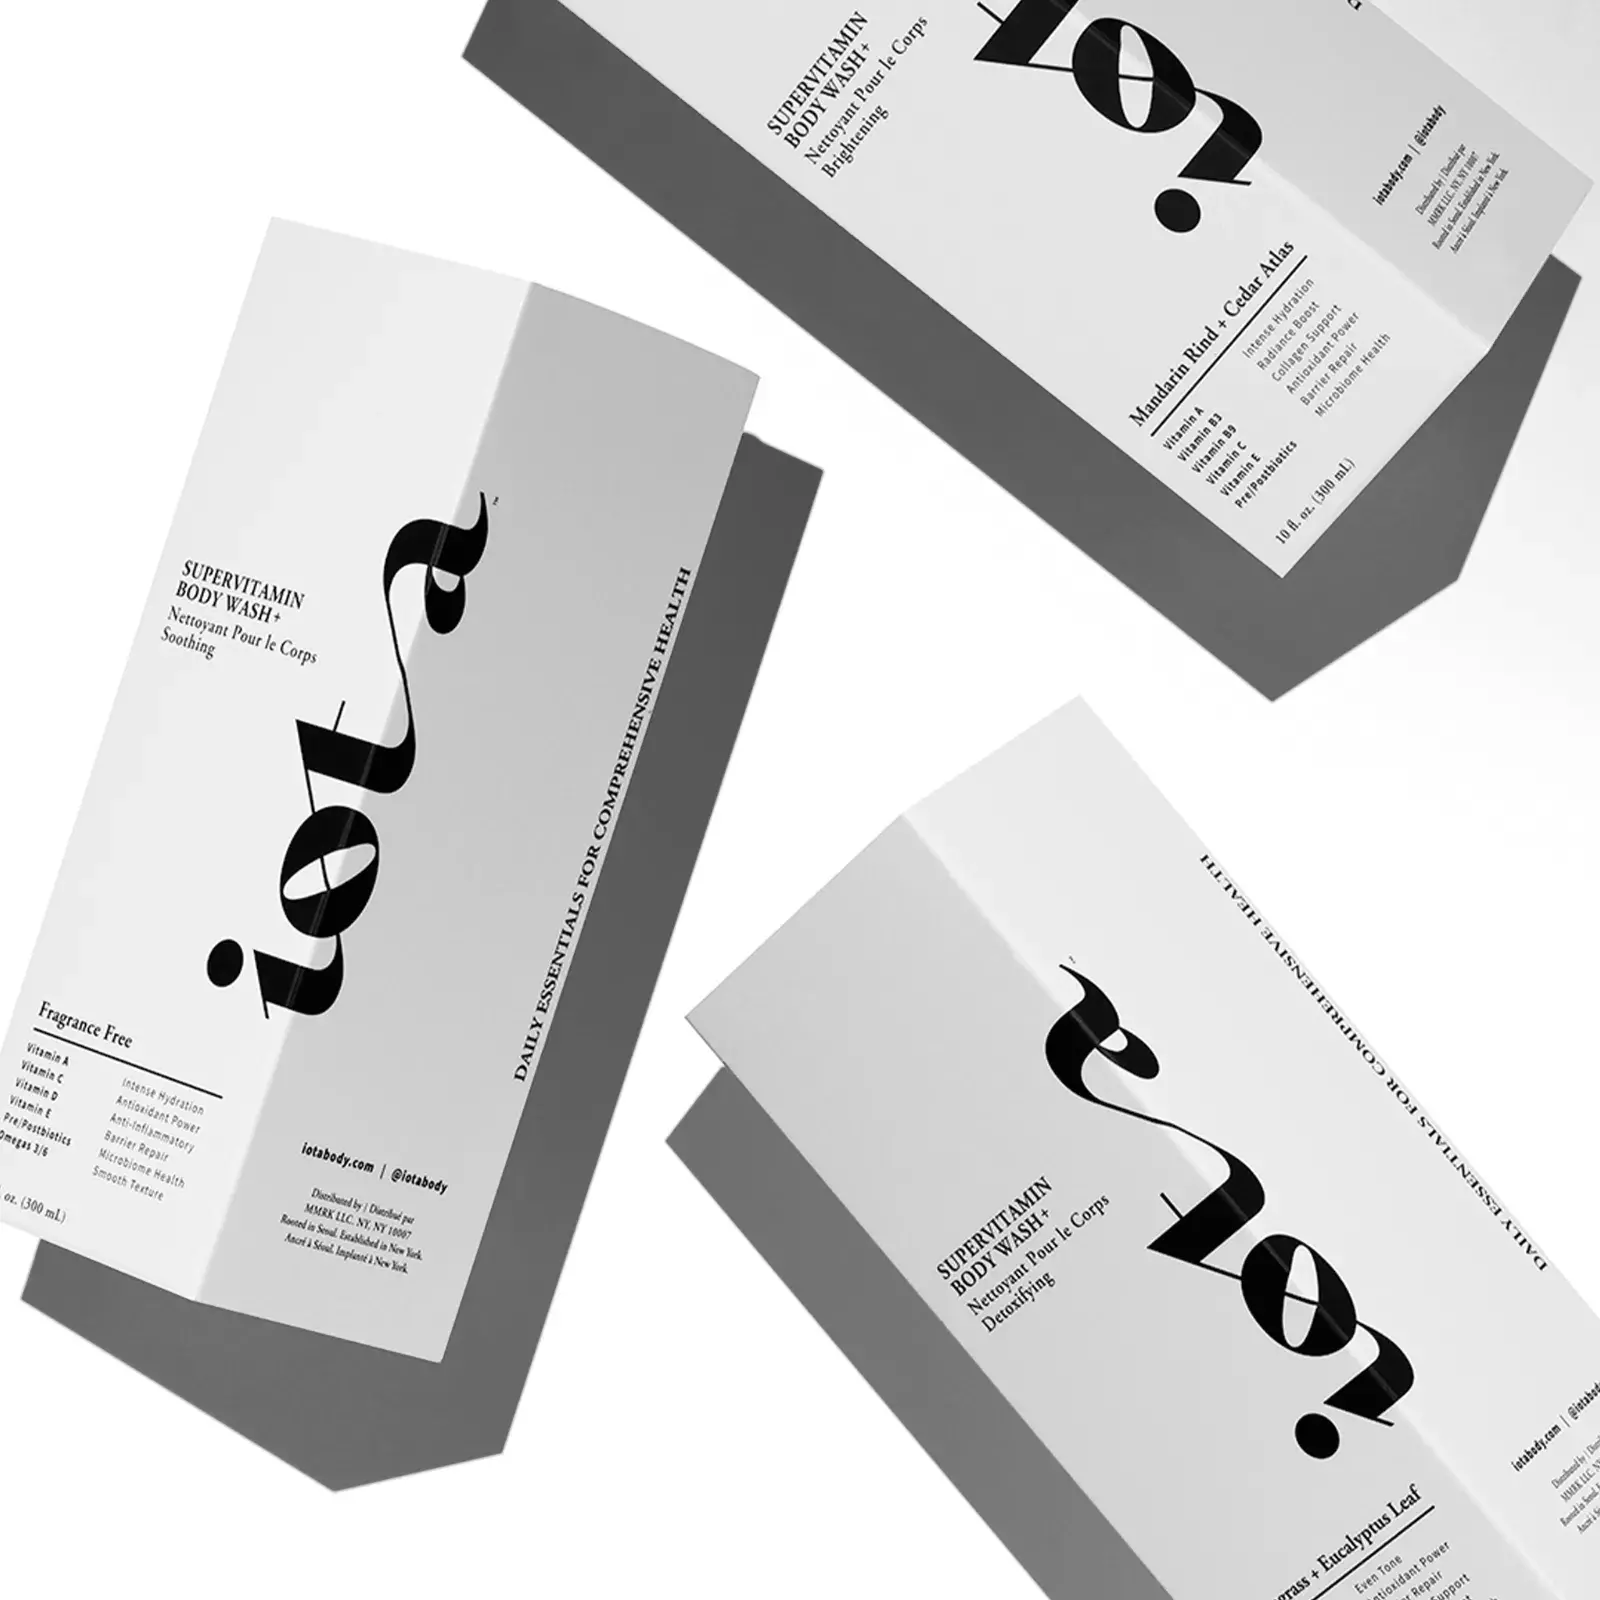 Bold look for The First Nutritional Bodycare Brand, iota by ROOK / NYC 